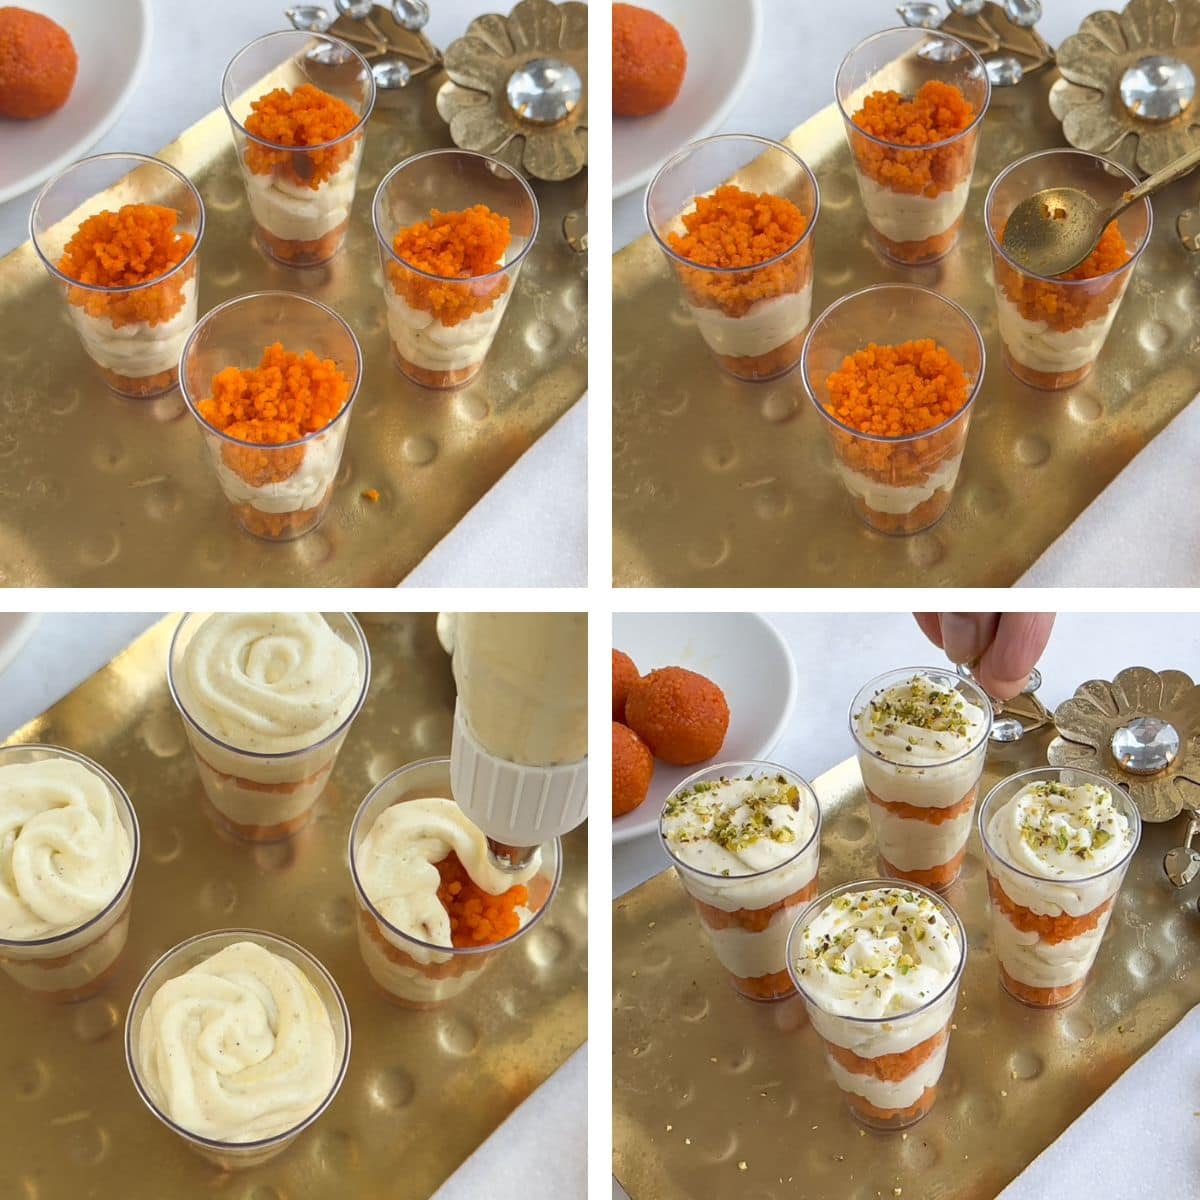 Assembling Ladoo cheesecake in a cup